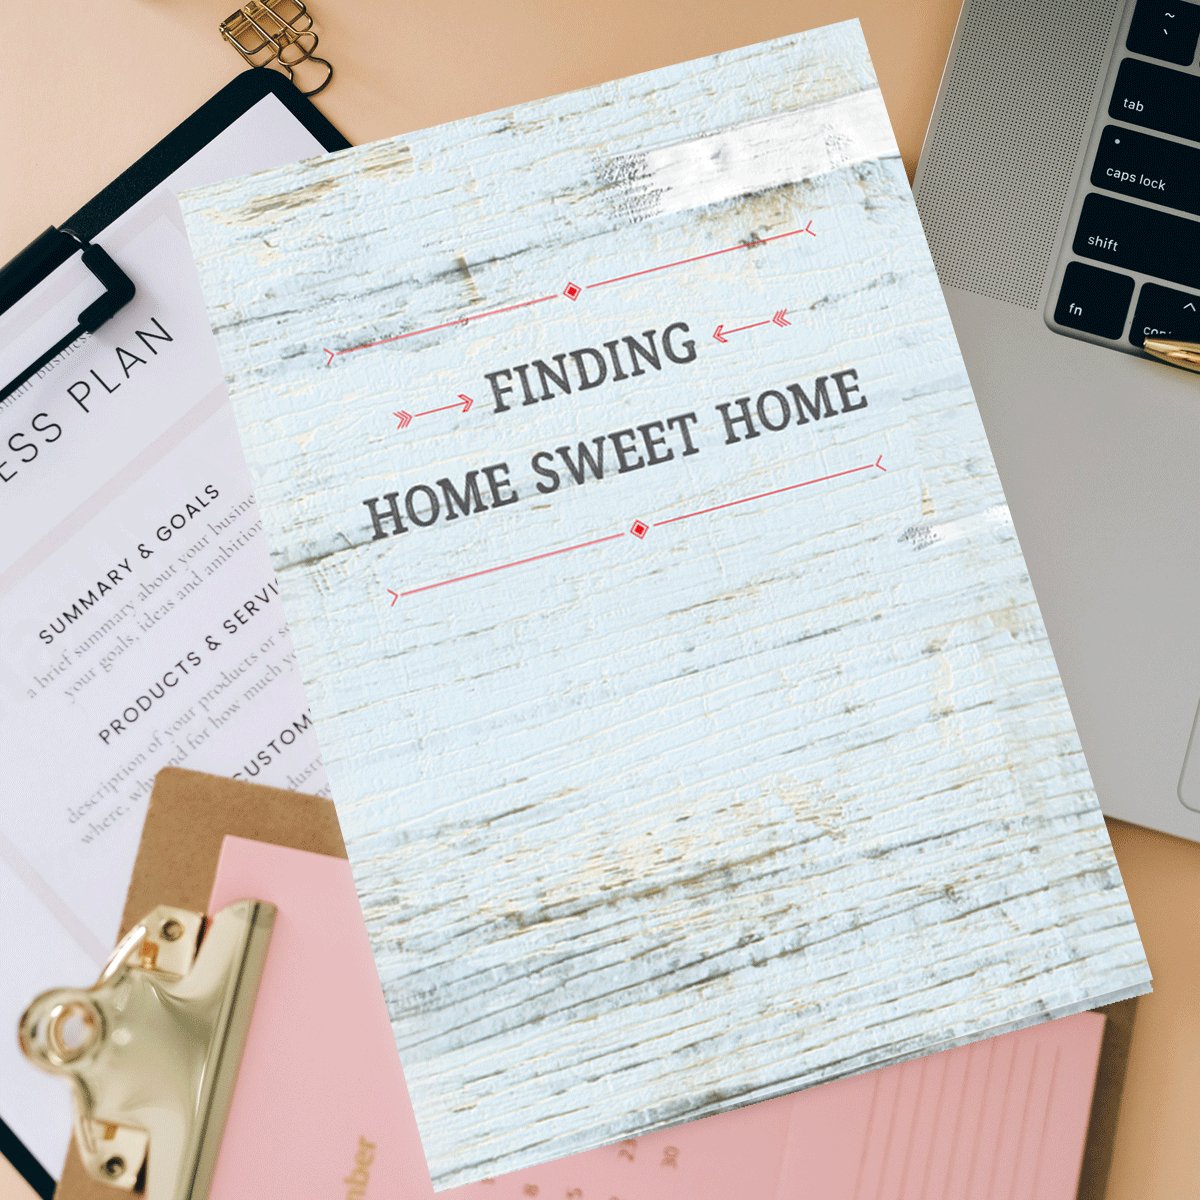 Presentation Folder - Finding Home Sweet Home - All Things Real Estate